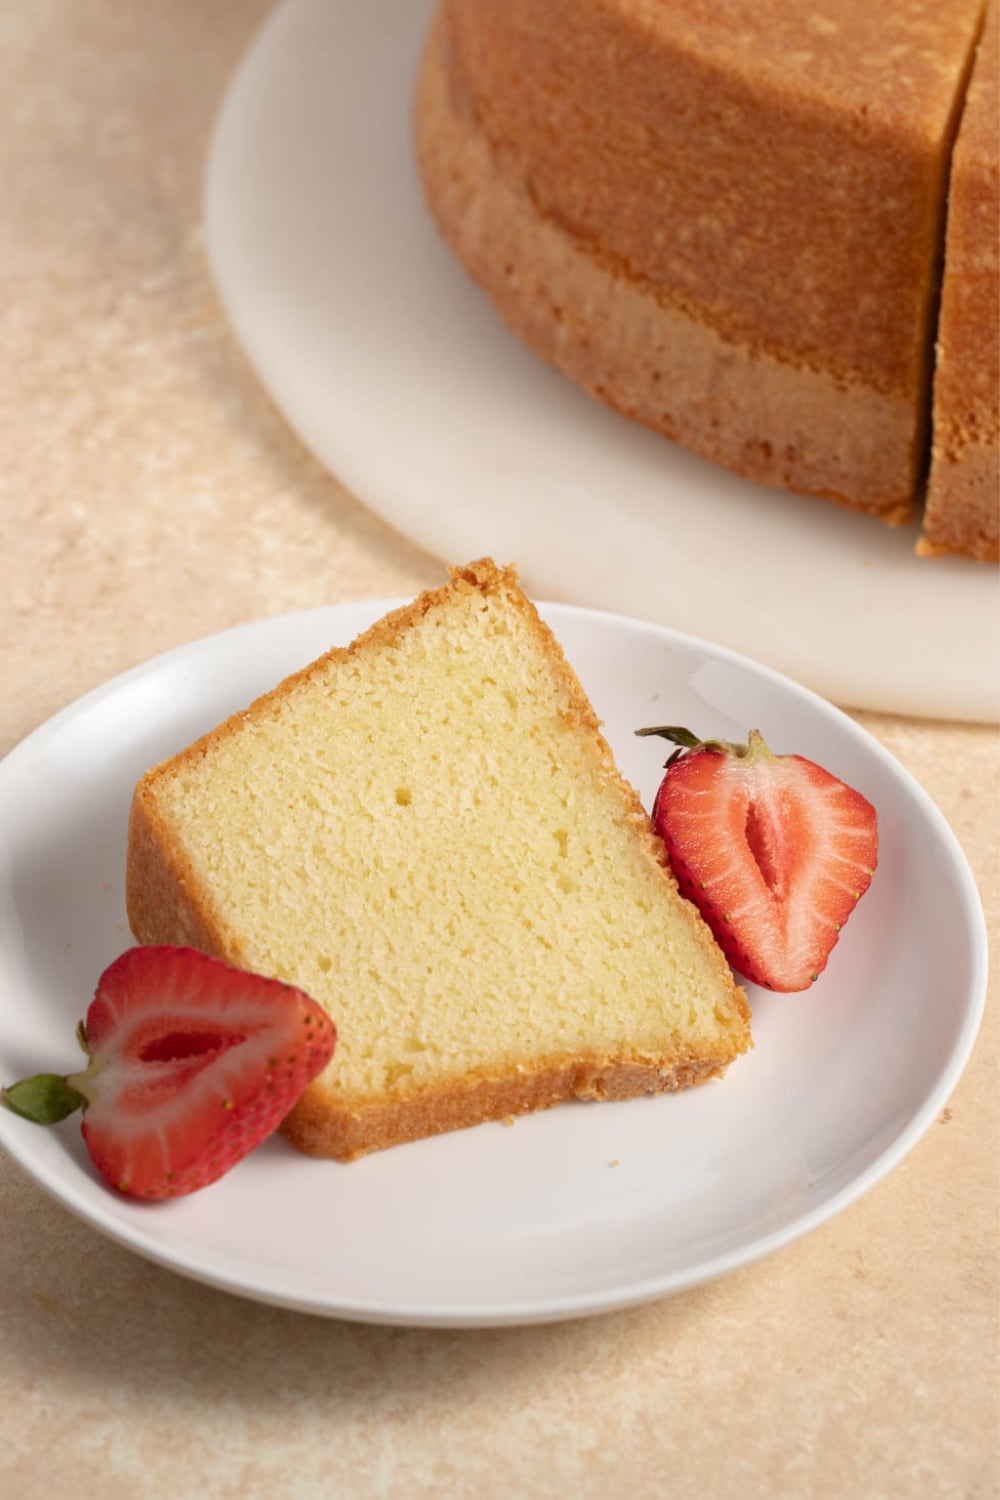 Sliced Homemade Sour Cream Pound Cake with Strawberries